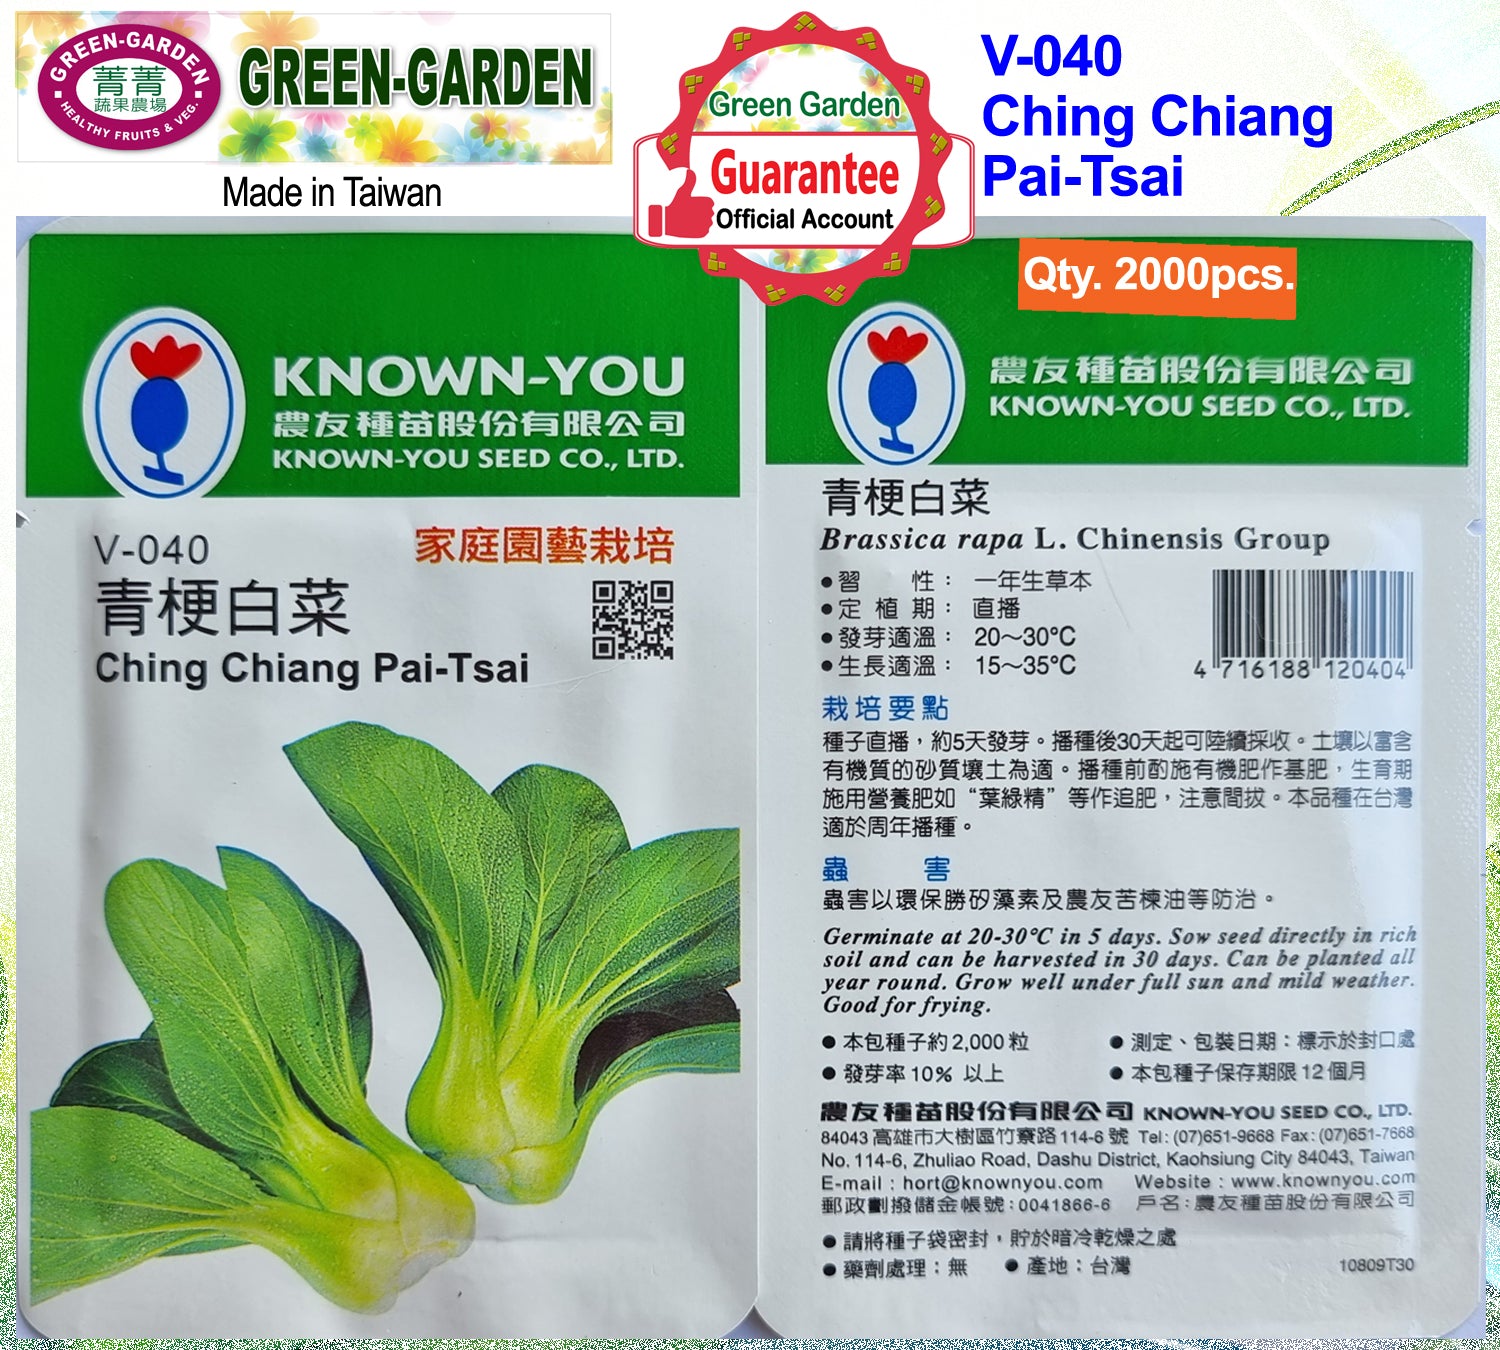 Known You Vegetable Seeds (V-040 Taiwan Pechay)